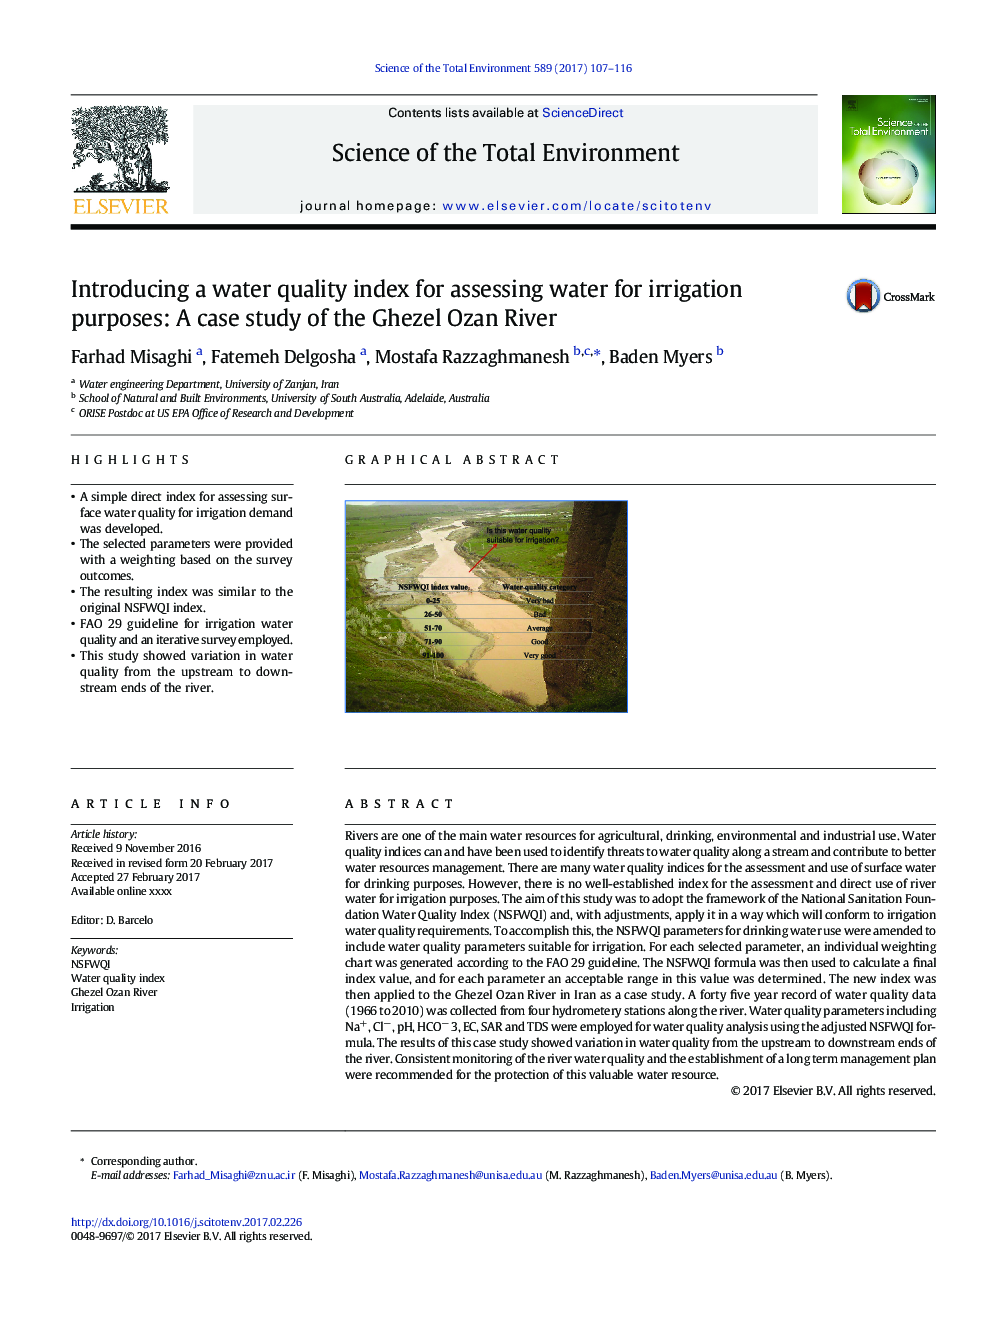 Introducing a water quality index for assessing water for irrigation purposes: A case study of the Ghezel Ozan River